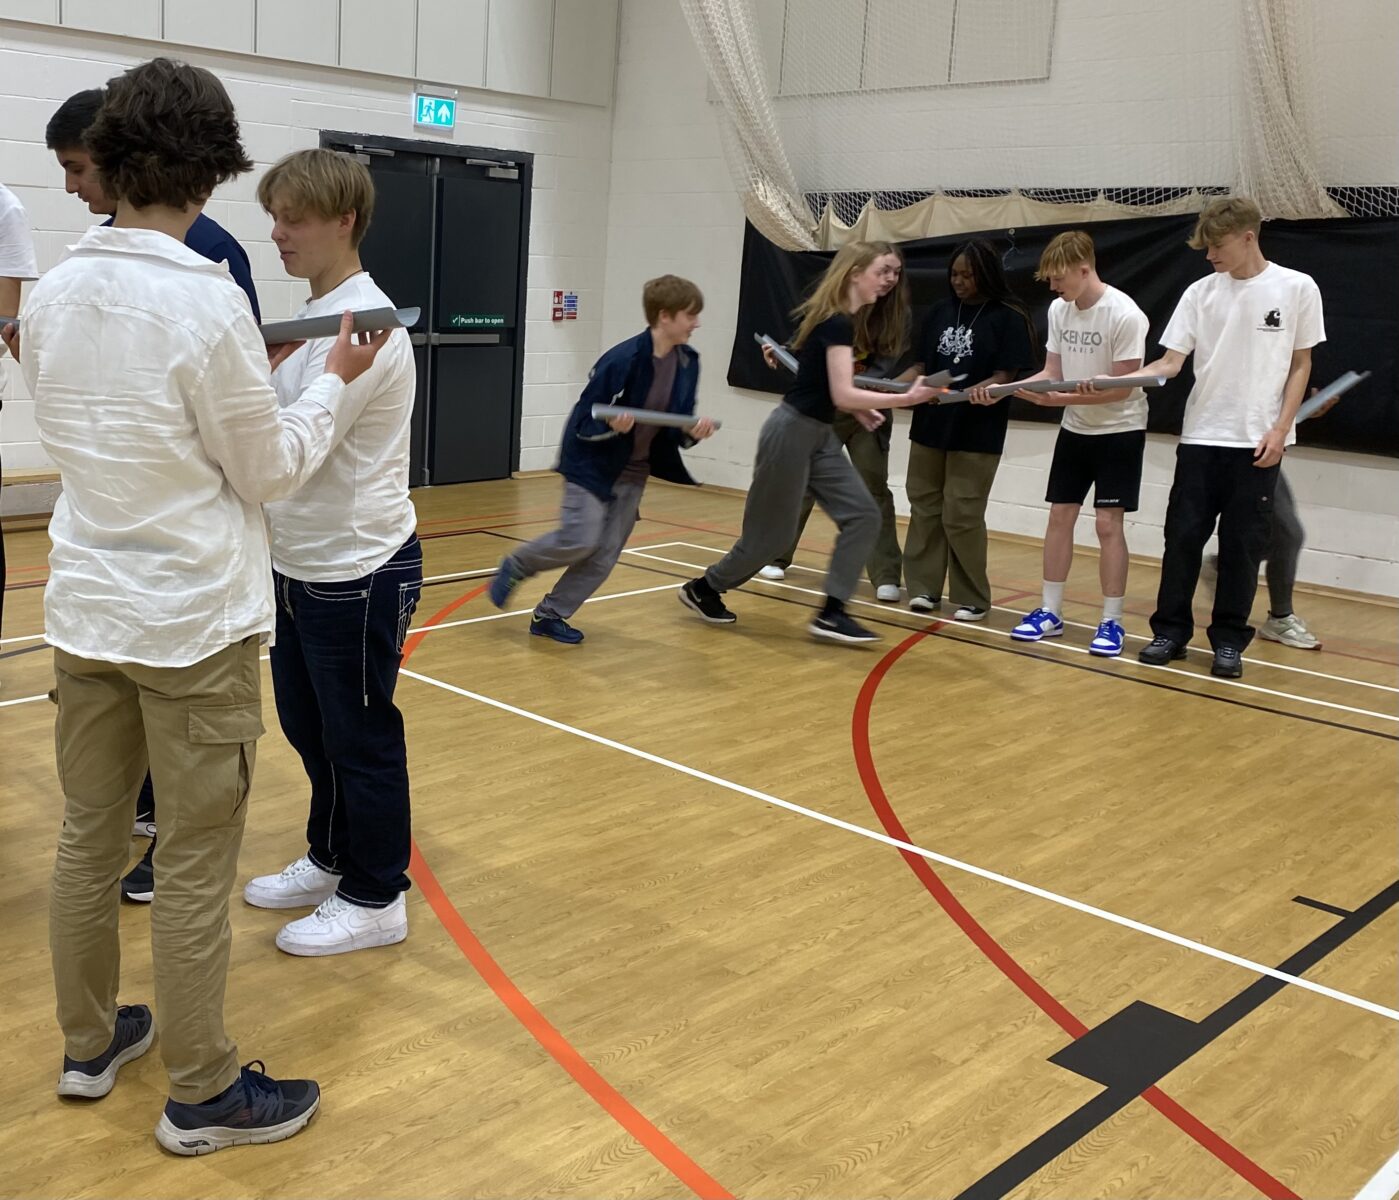 Students partaking in a team building activity in a sports hall